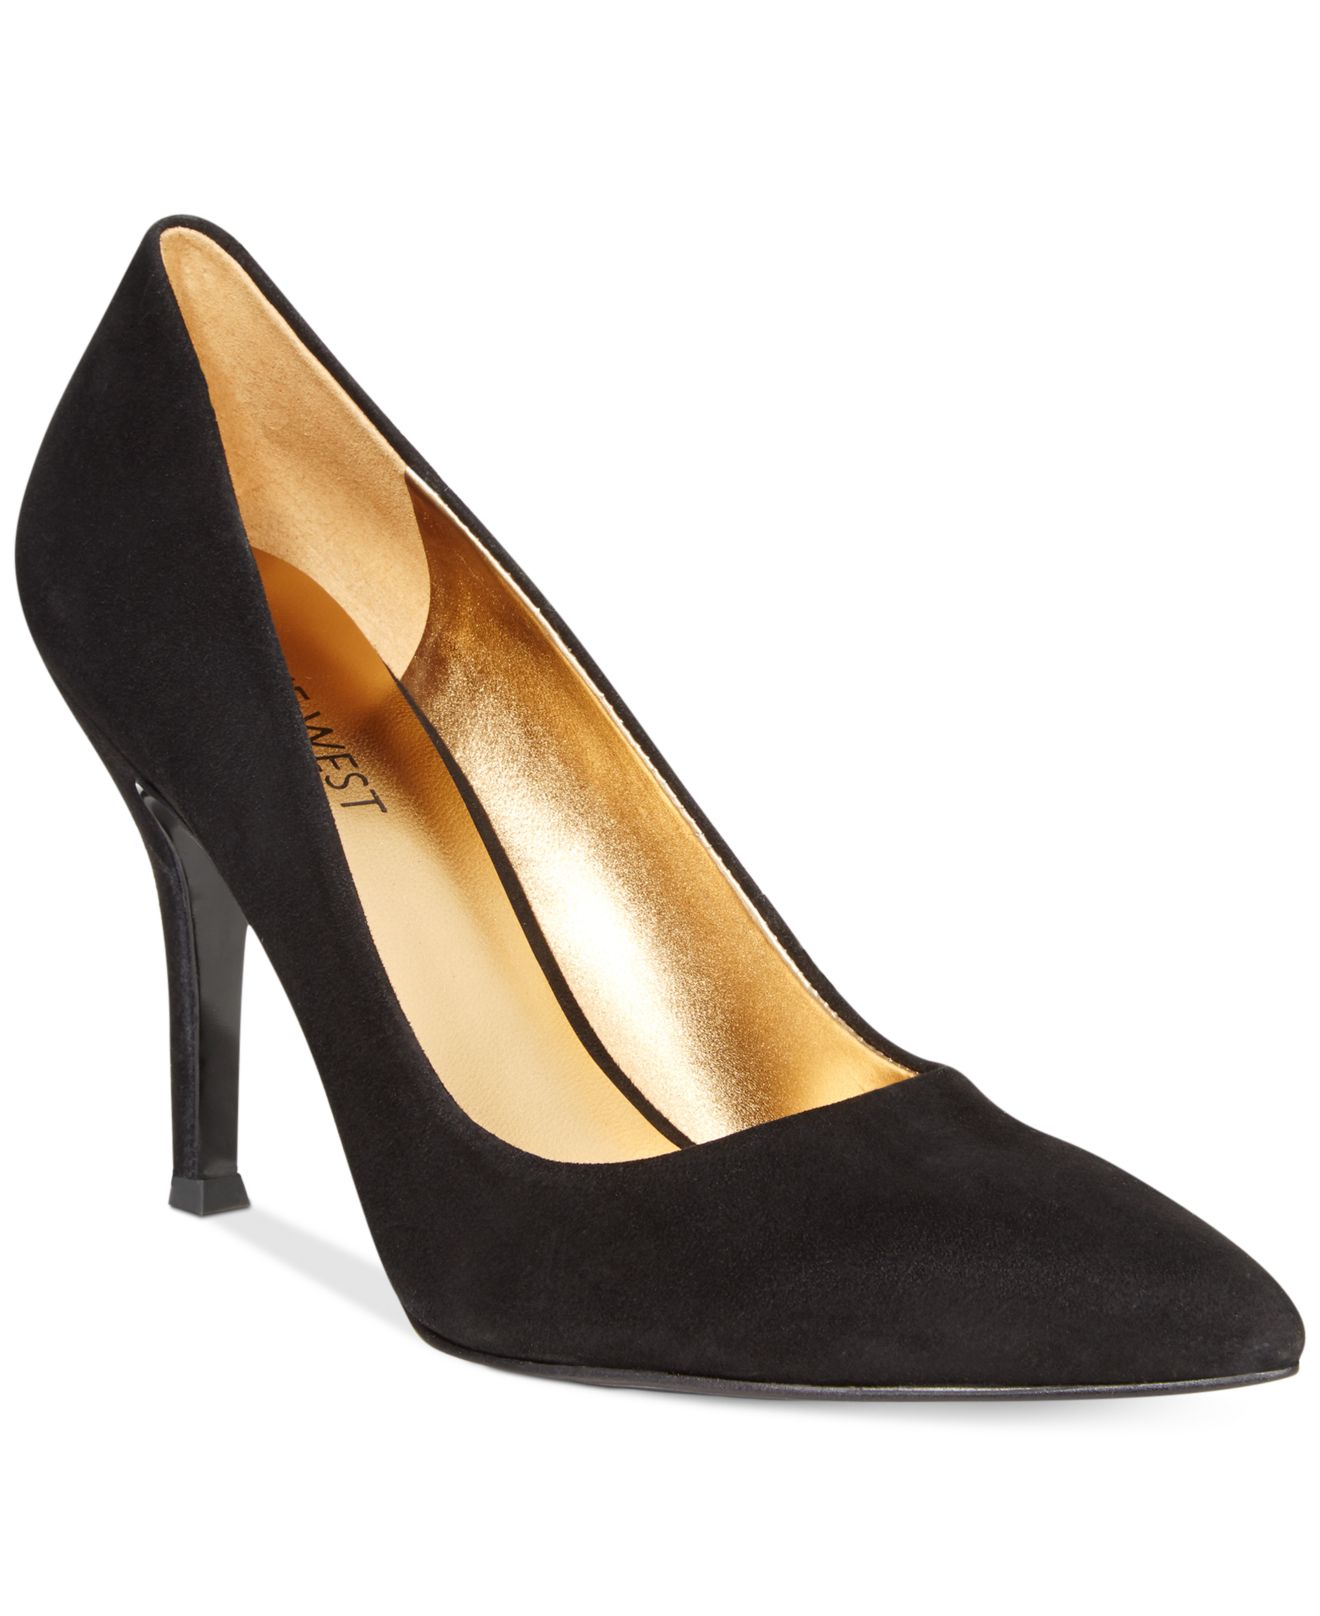 Lyst - Nine West Flax Suede Pointed Toe Pumps in Black